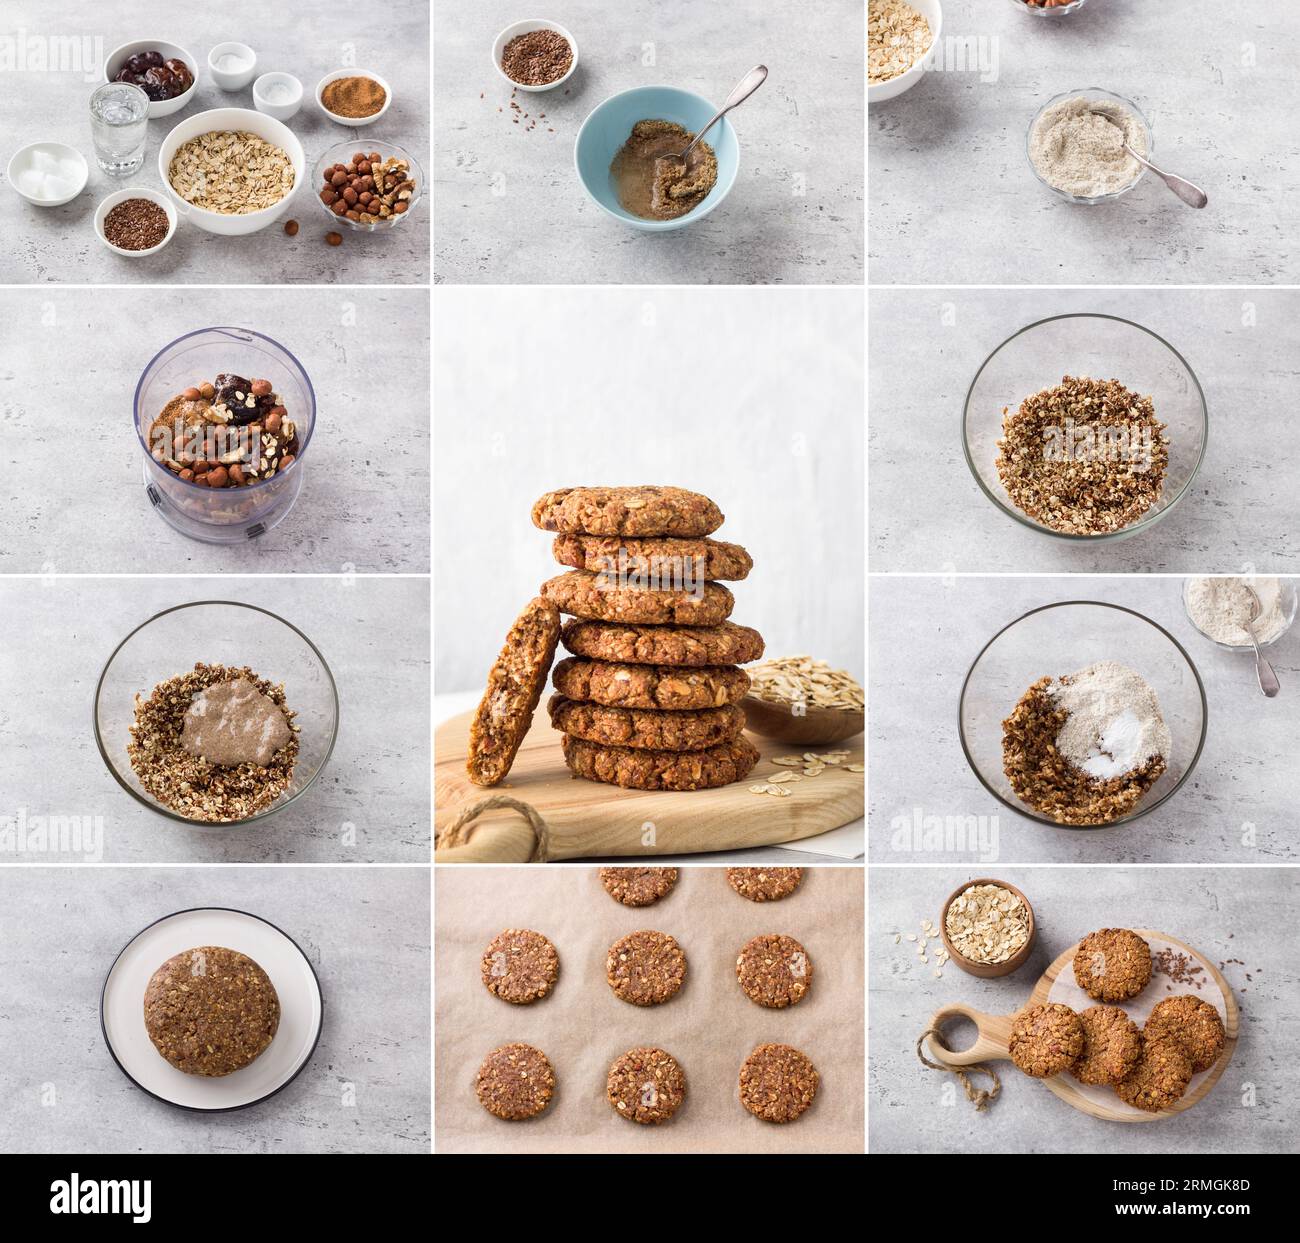 Cooking vegan oatmeal cookies with nuts and flaxseed, collage, do it yourself, step by step, ingredients, cooking steps, final dish on a gray stone Stock Photo